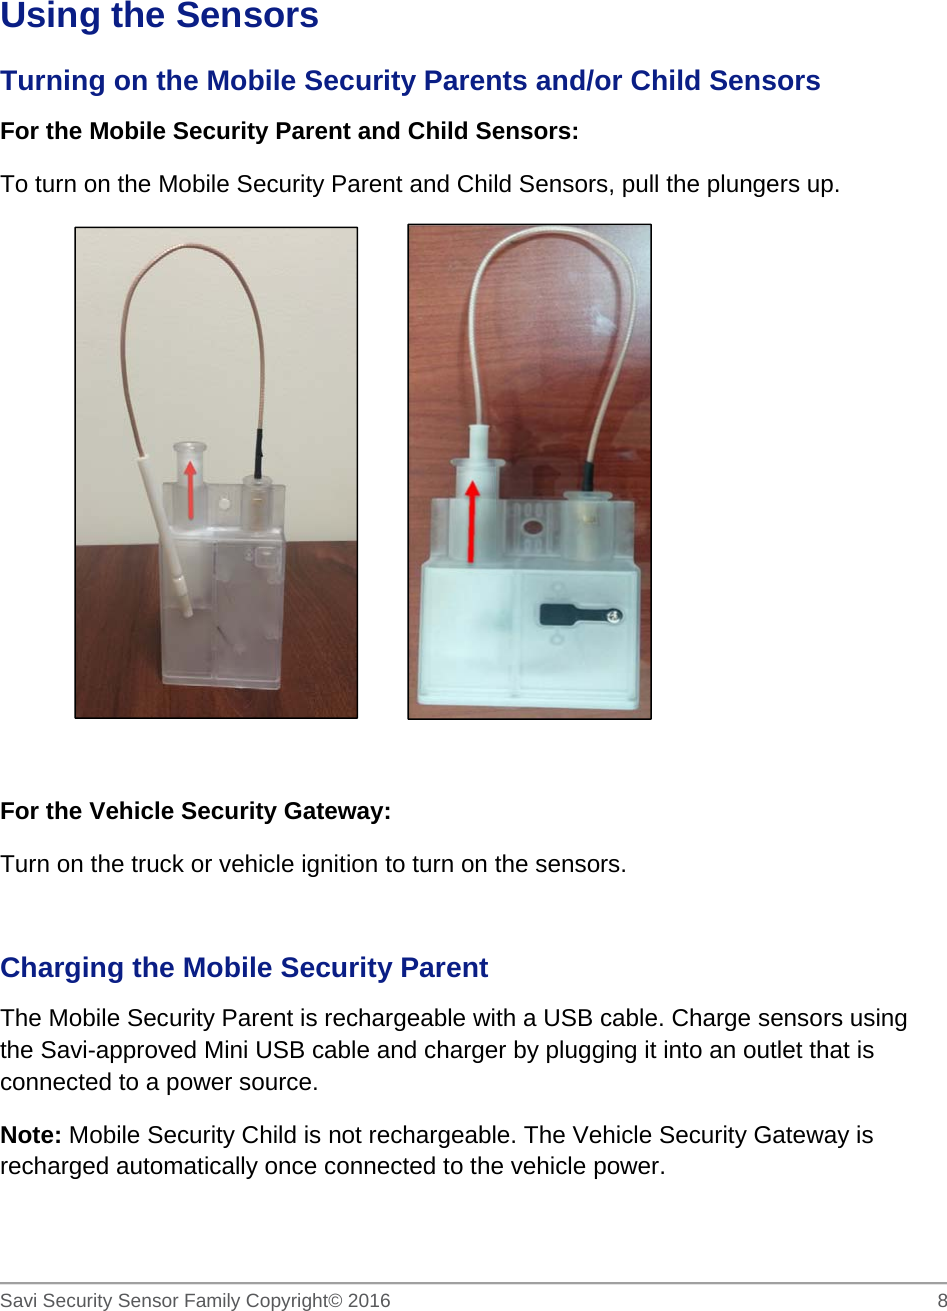   Savi Security Sensor Family Copyright© 2016     8   Using the Sensors Turning on the Mobile Security Parents and/or Child Sensors For the Mobile Security Parent and Child Sensors:   To turn on the Mobile Security Parent and Child Sensors, pull the plungers up.            For the Vehicle Security Gateway:  Turn on the truck or vehicle ignition to turn on the sensors.  Charging the Mobile Security Parent The Mobile Security Parent is rechargeable with a USB cable. Charge sensors using the Savi-approved Mini USB cable and charger by plugging it into an outlet that is connected to a power source.  Note: Mobile Security Child is not rechargeable. The Vehicle Security Gateway is recharged automatically once connected to the vehicle power. 